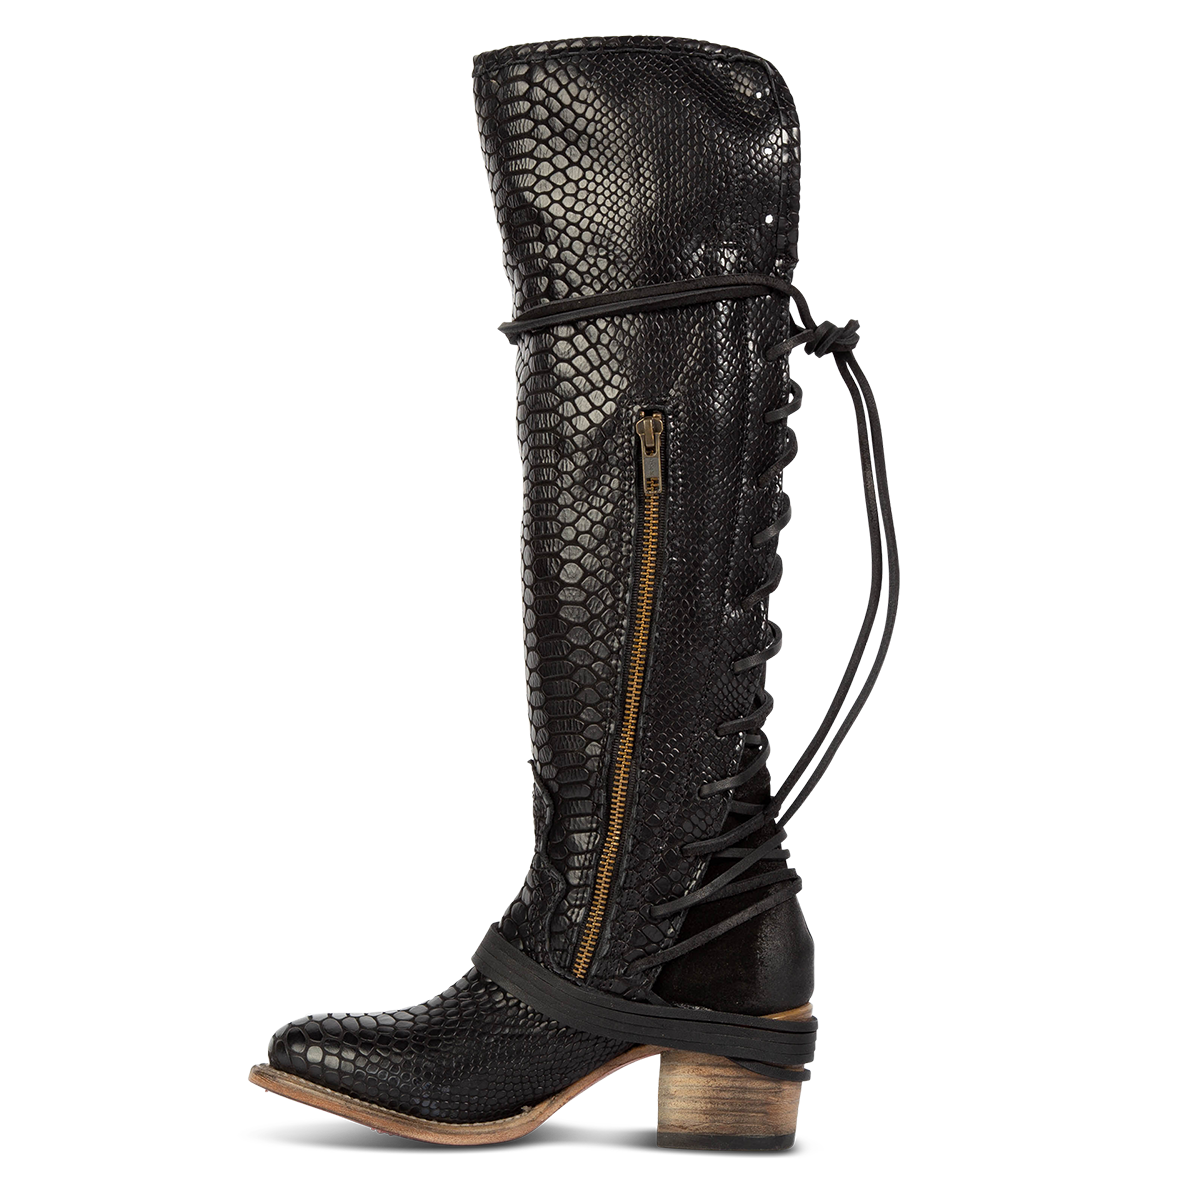 Inside view showing working brass zip closure and adjustable wrap around laces on FREEBIRD women's Coal black snake tall boot